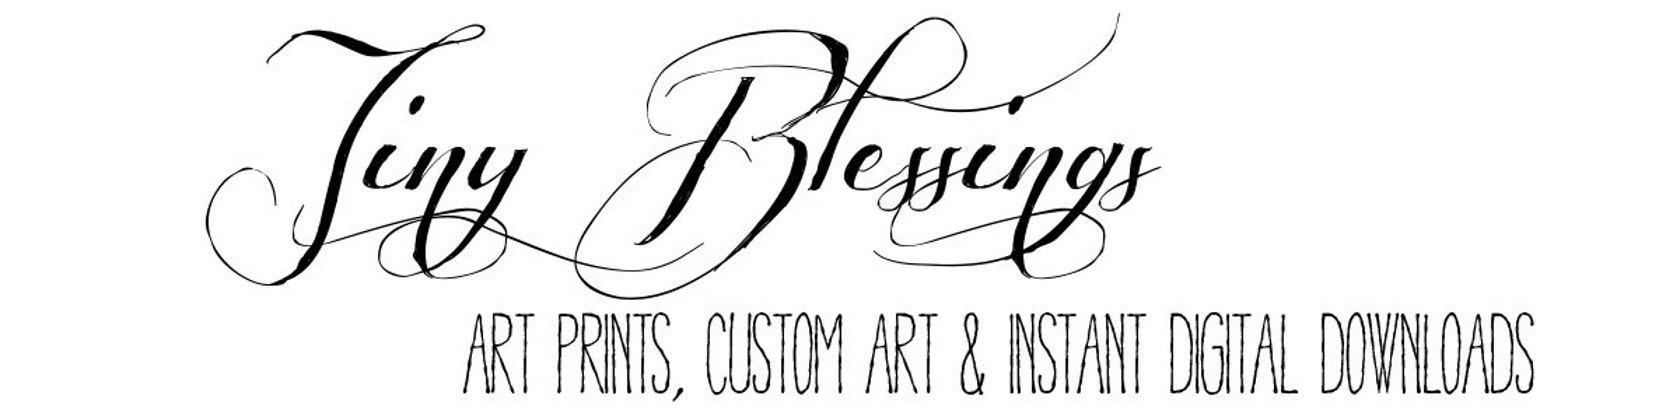 Professional Art Prints and DIY Digital by tinyblessingstx on Etsy